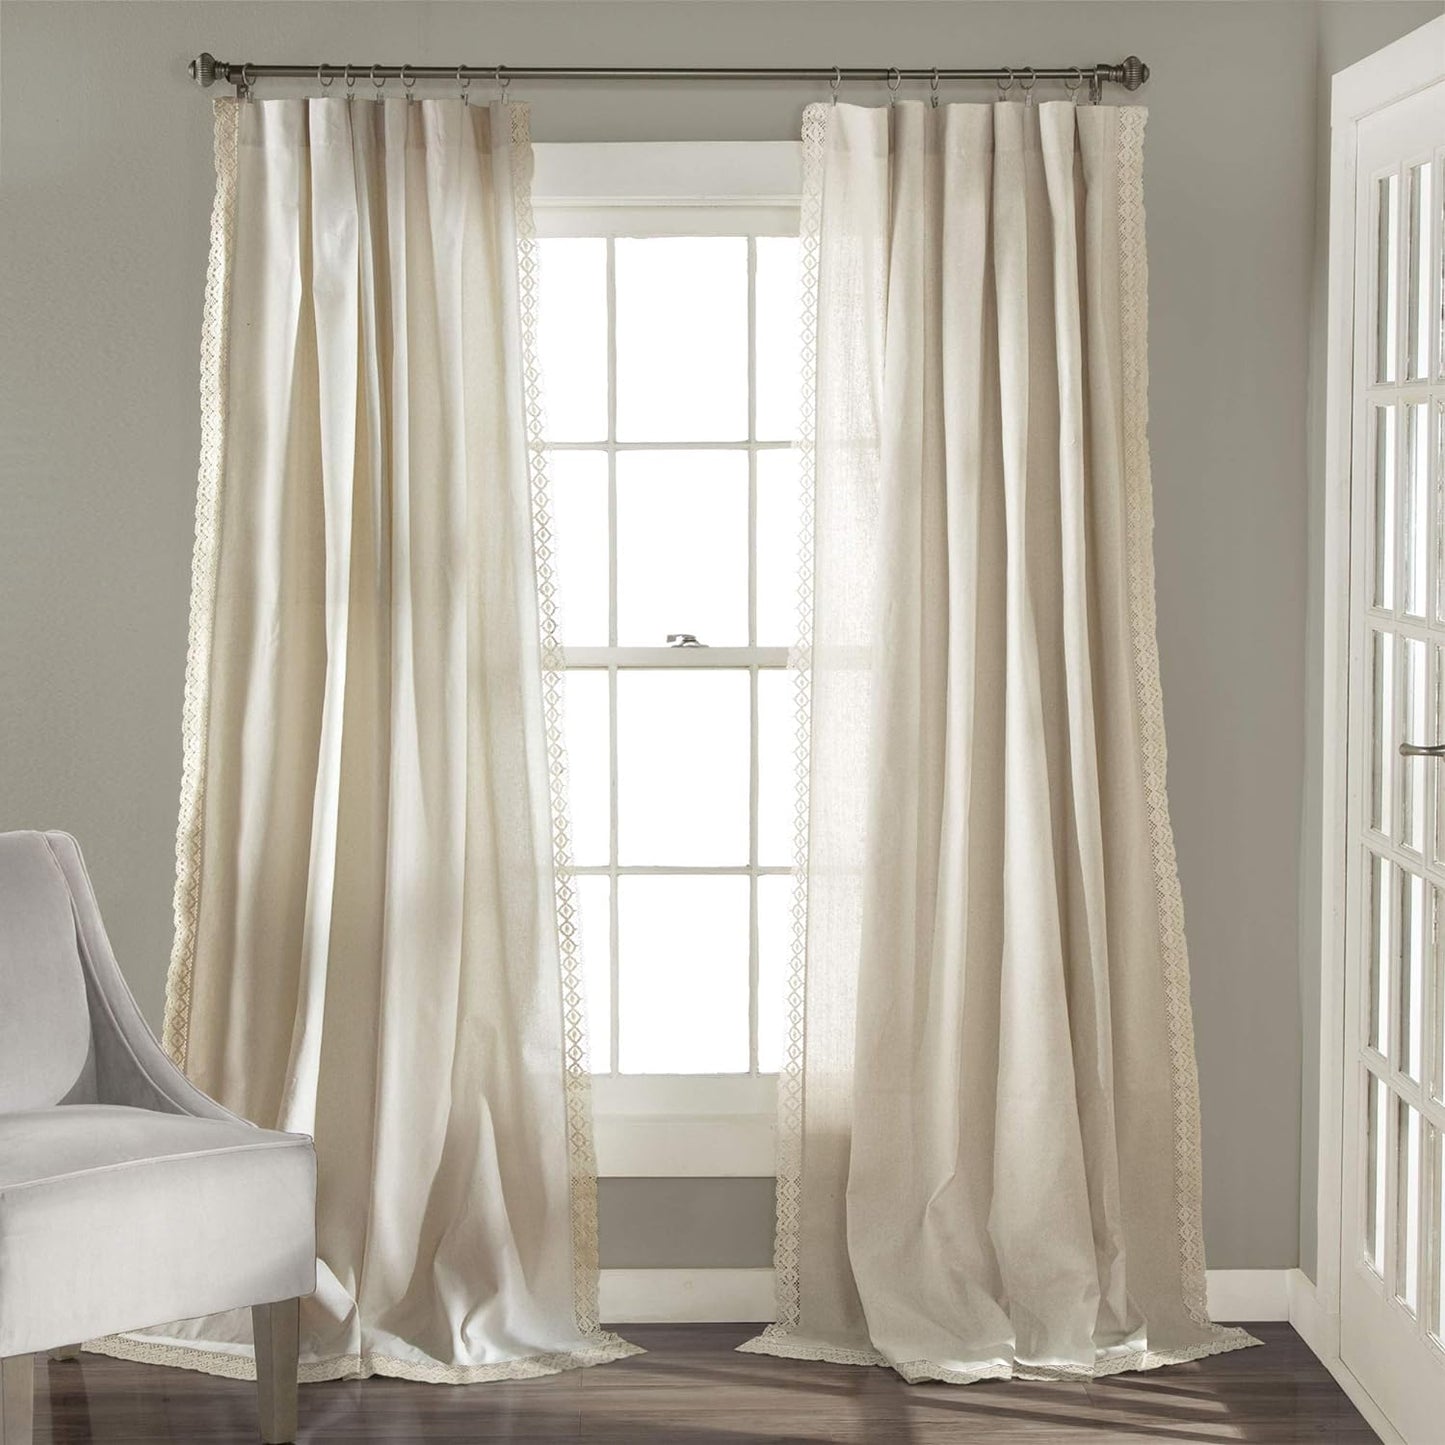 Lush Decor Rosalie Light Filtering Window Curtain Panel Set- Pair- Vintage Farmhouse & French Country Style Curtains - Timeless Dreamy Drape - Romantic Lace Trim - 54" W X 84" L, White  Triangle Home Fashions Ivory Window Panel 84"L X 54"W